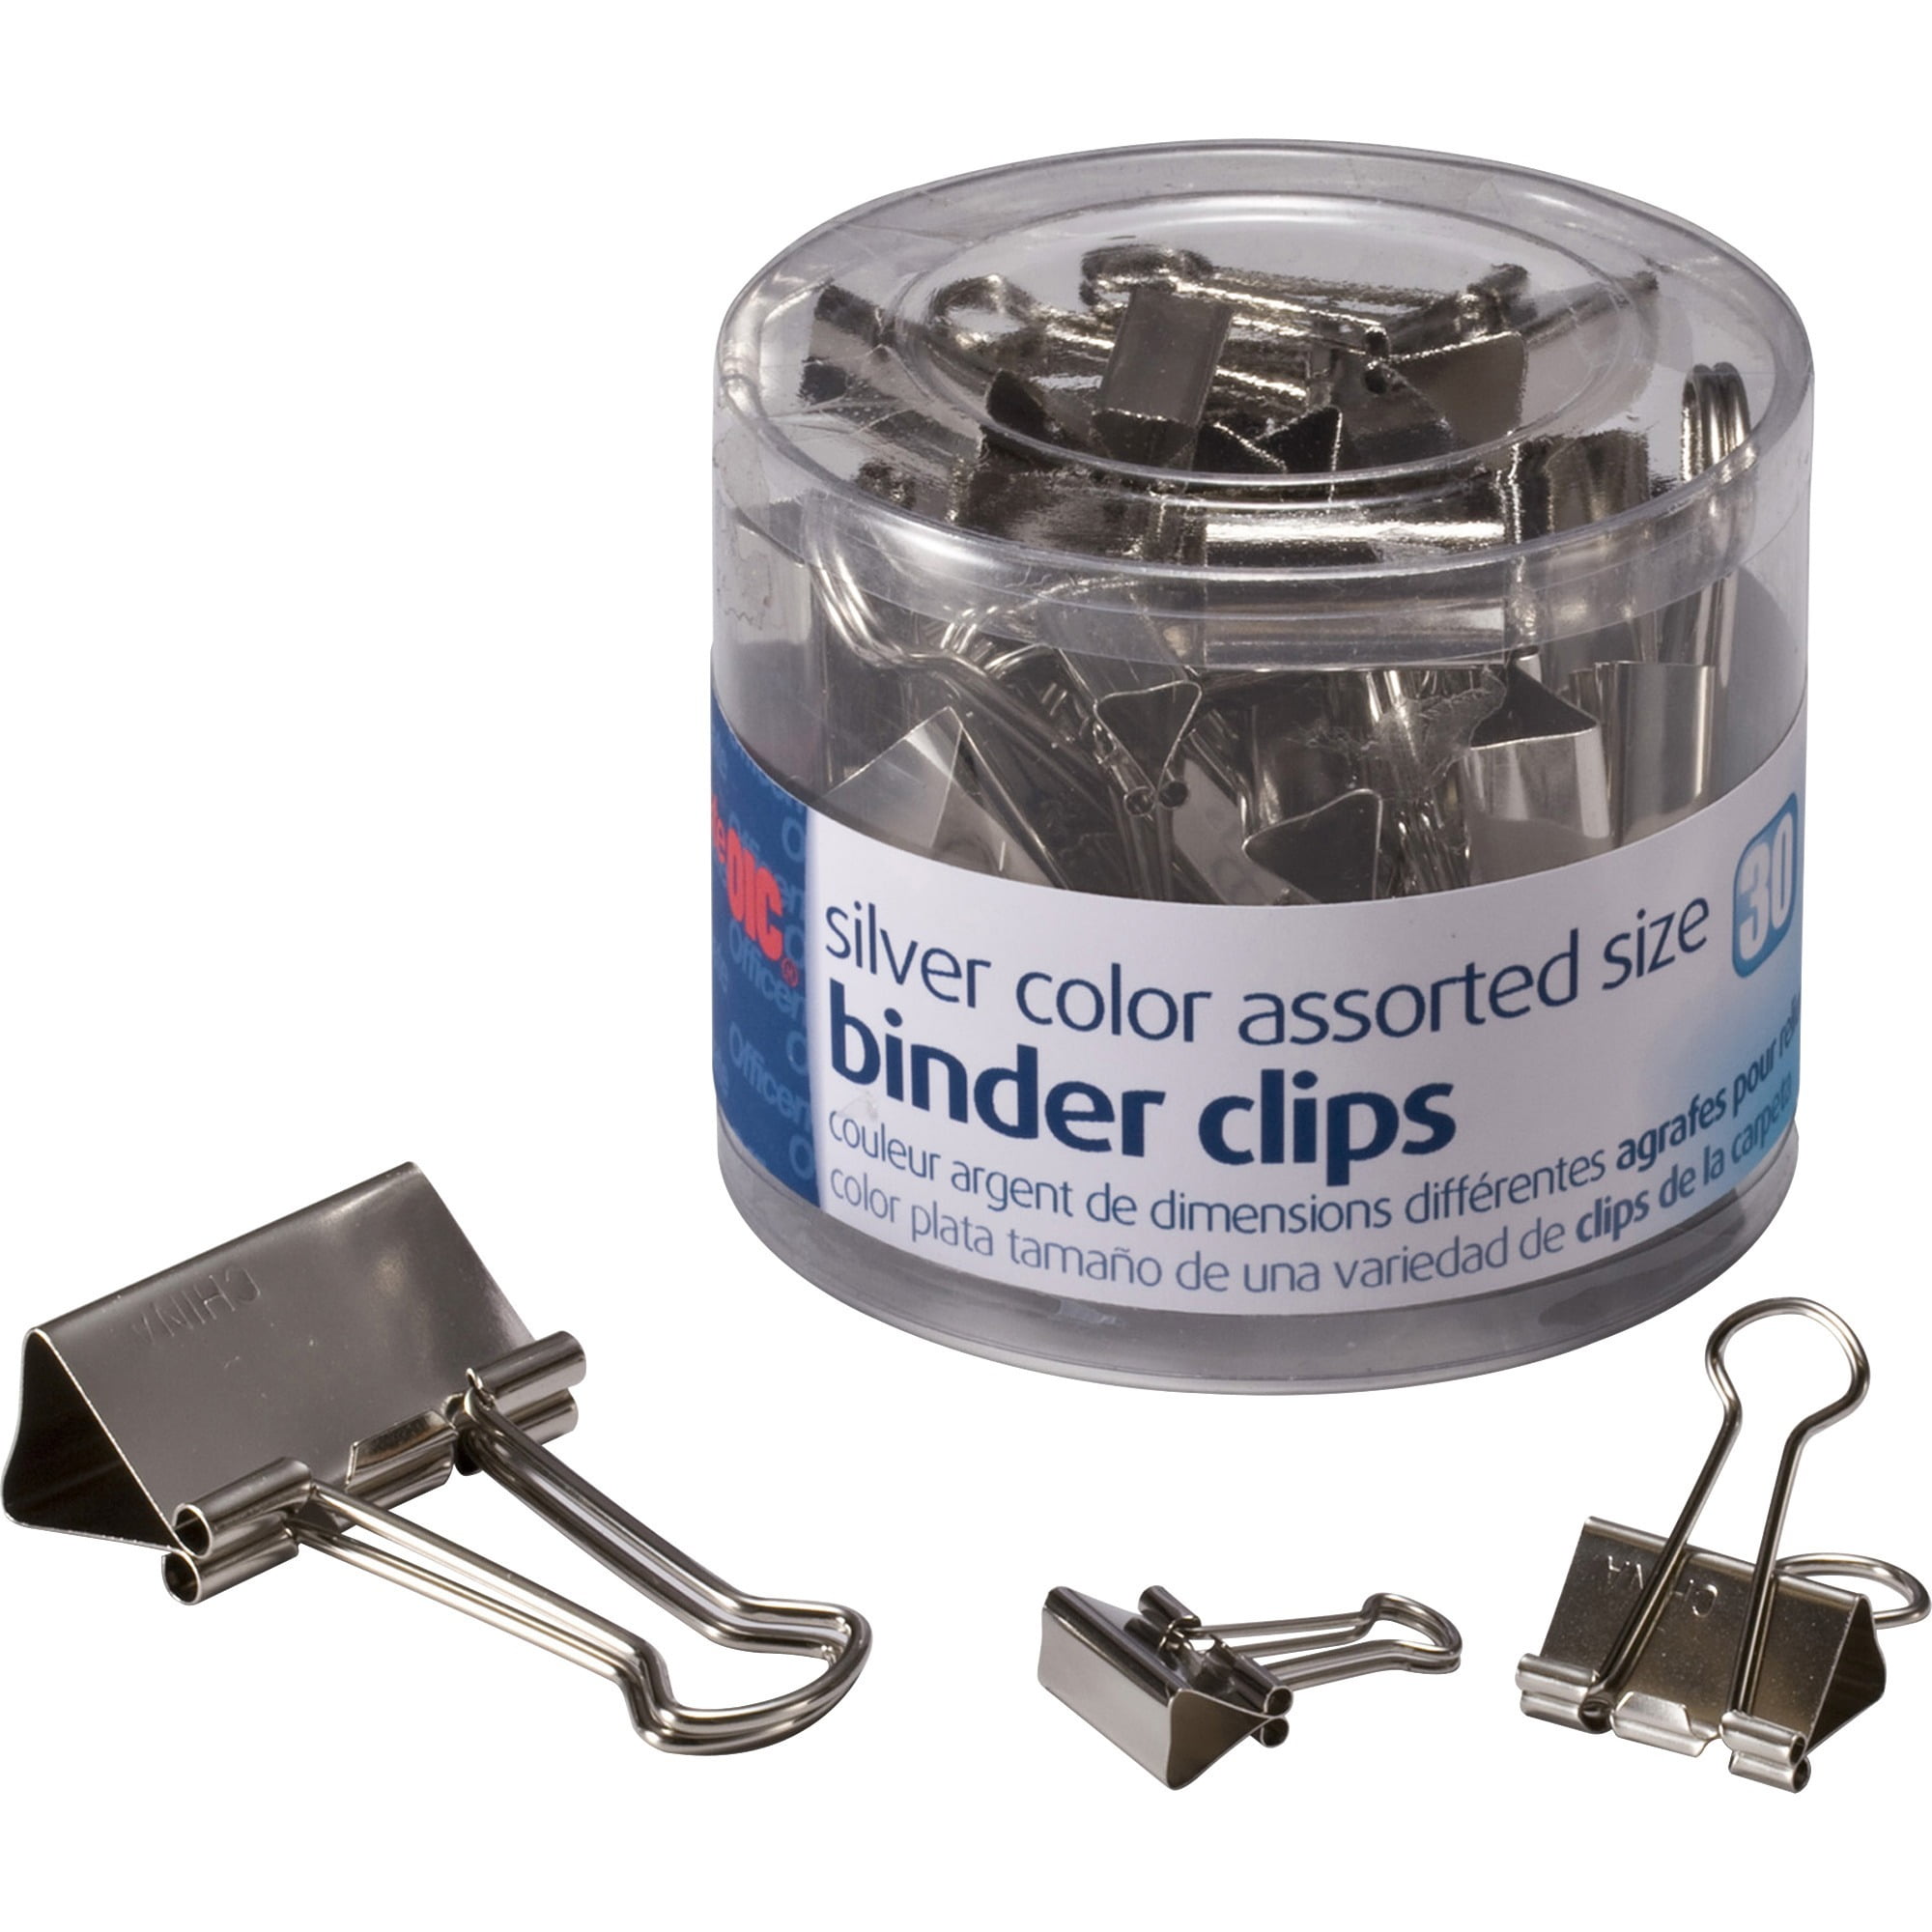 Officemate Binder Clips